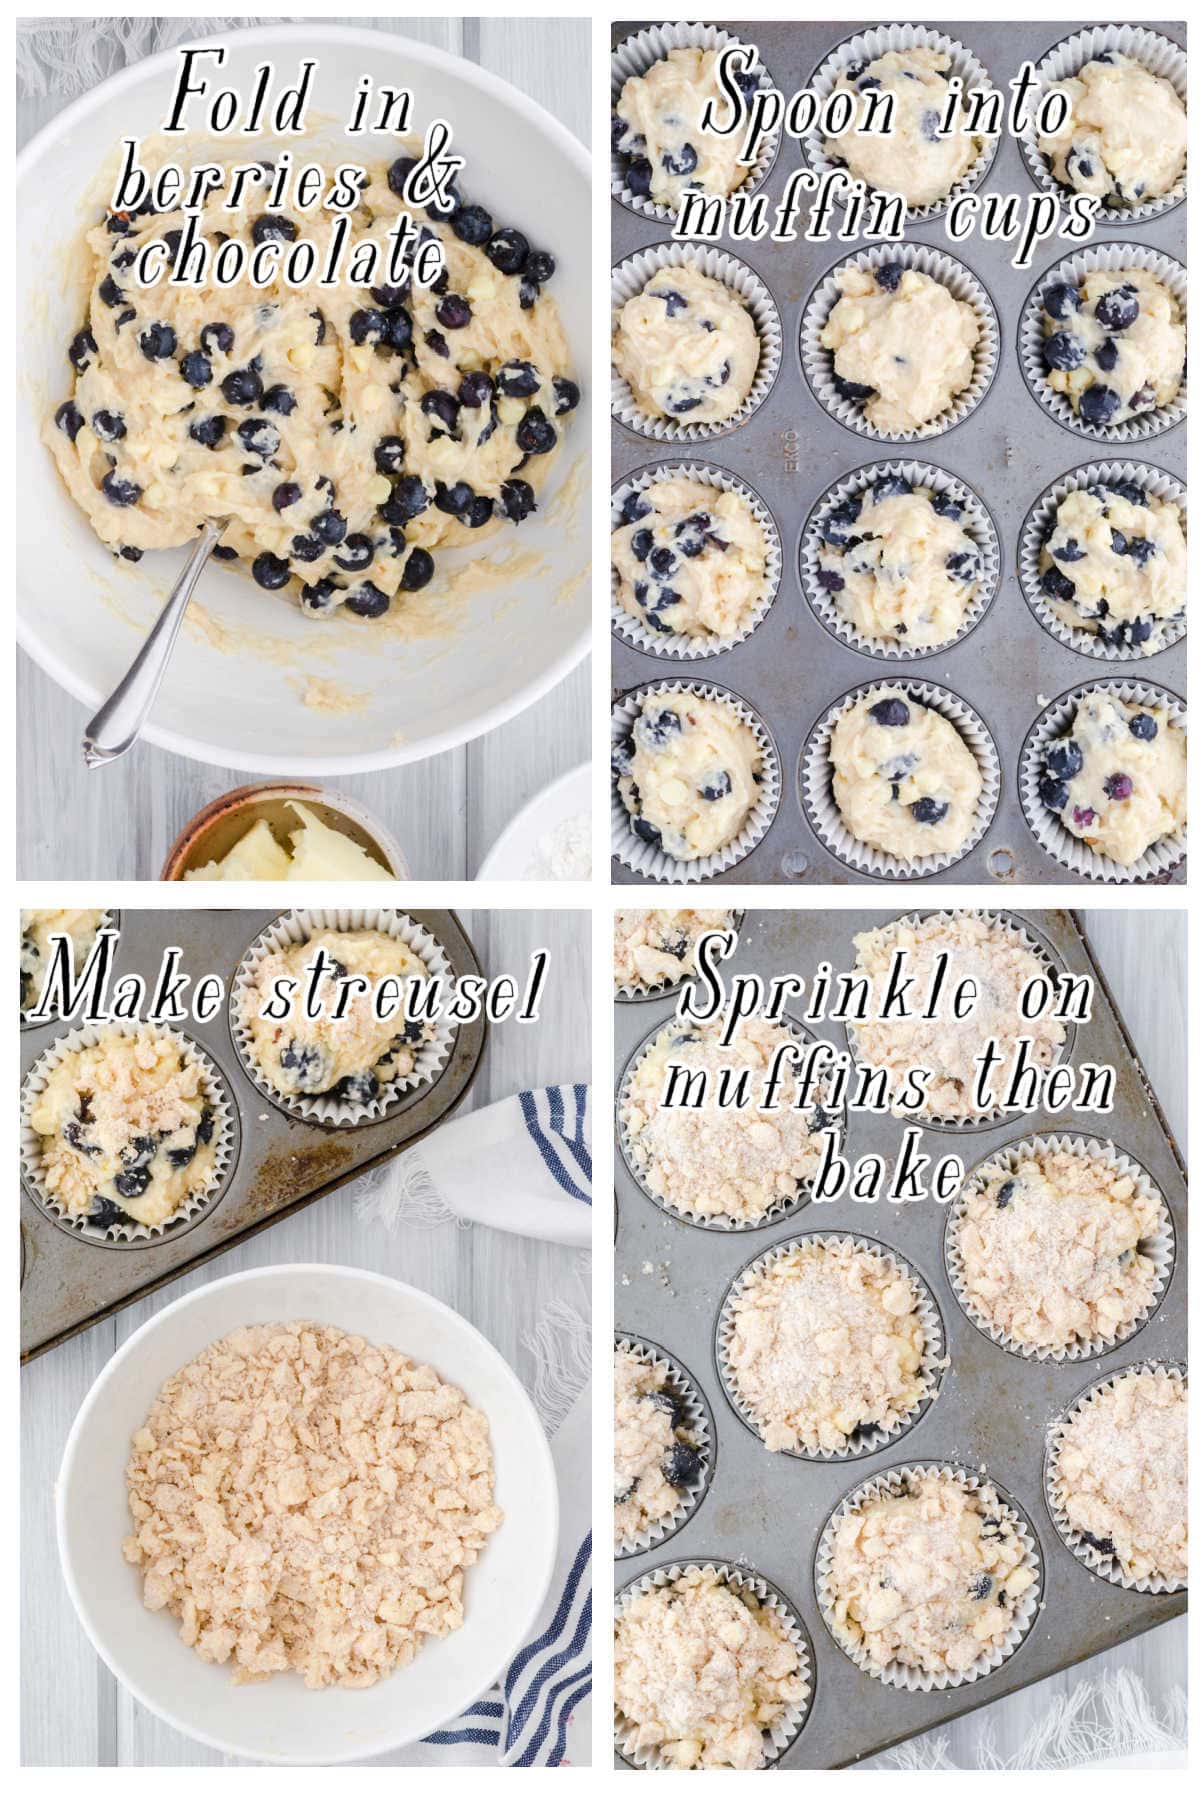 Steps 4 through 8 for making these muffins.